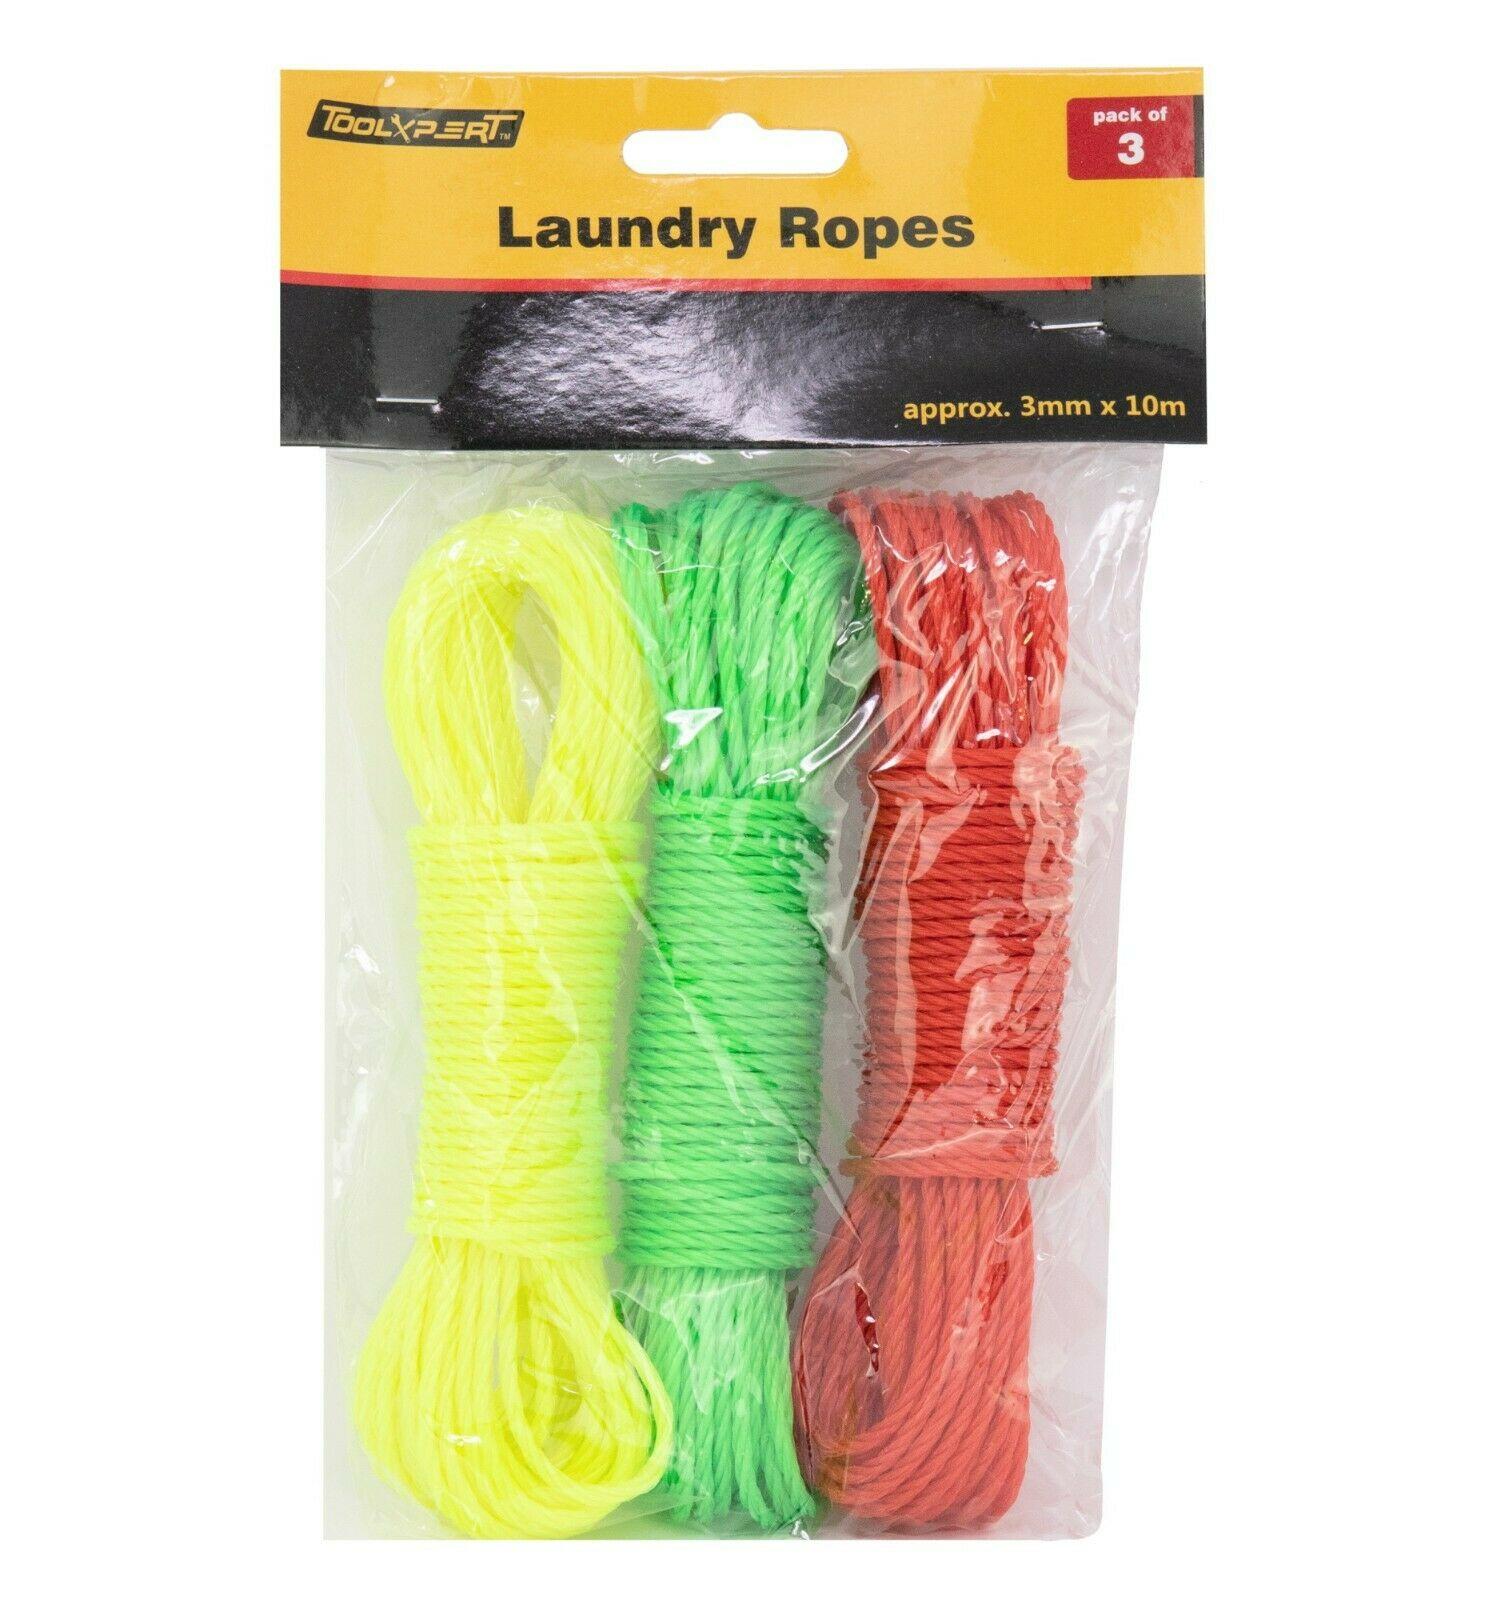 3 x 10m Washing Line Laundry Rope Dry Clothes Outdoor Garden Strong